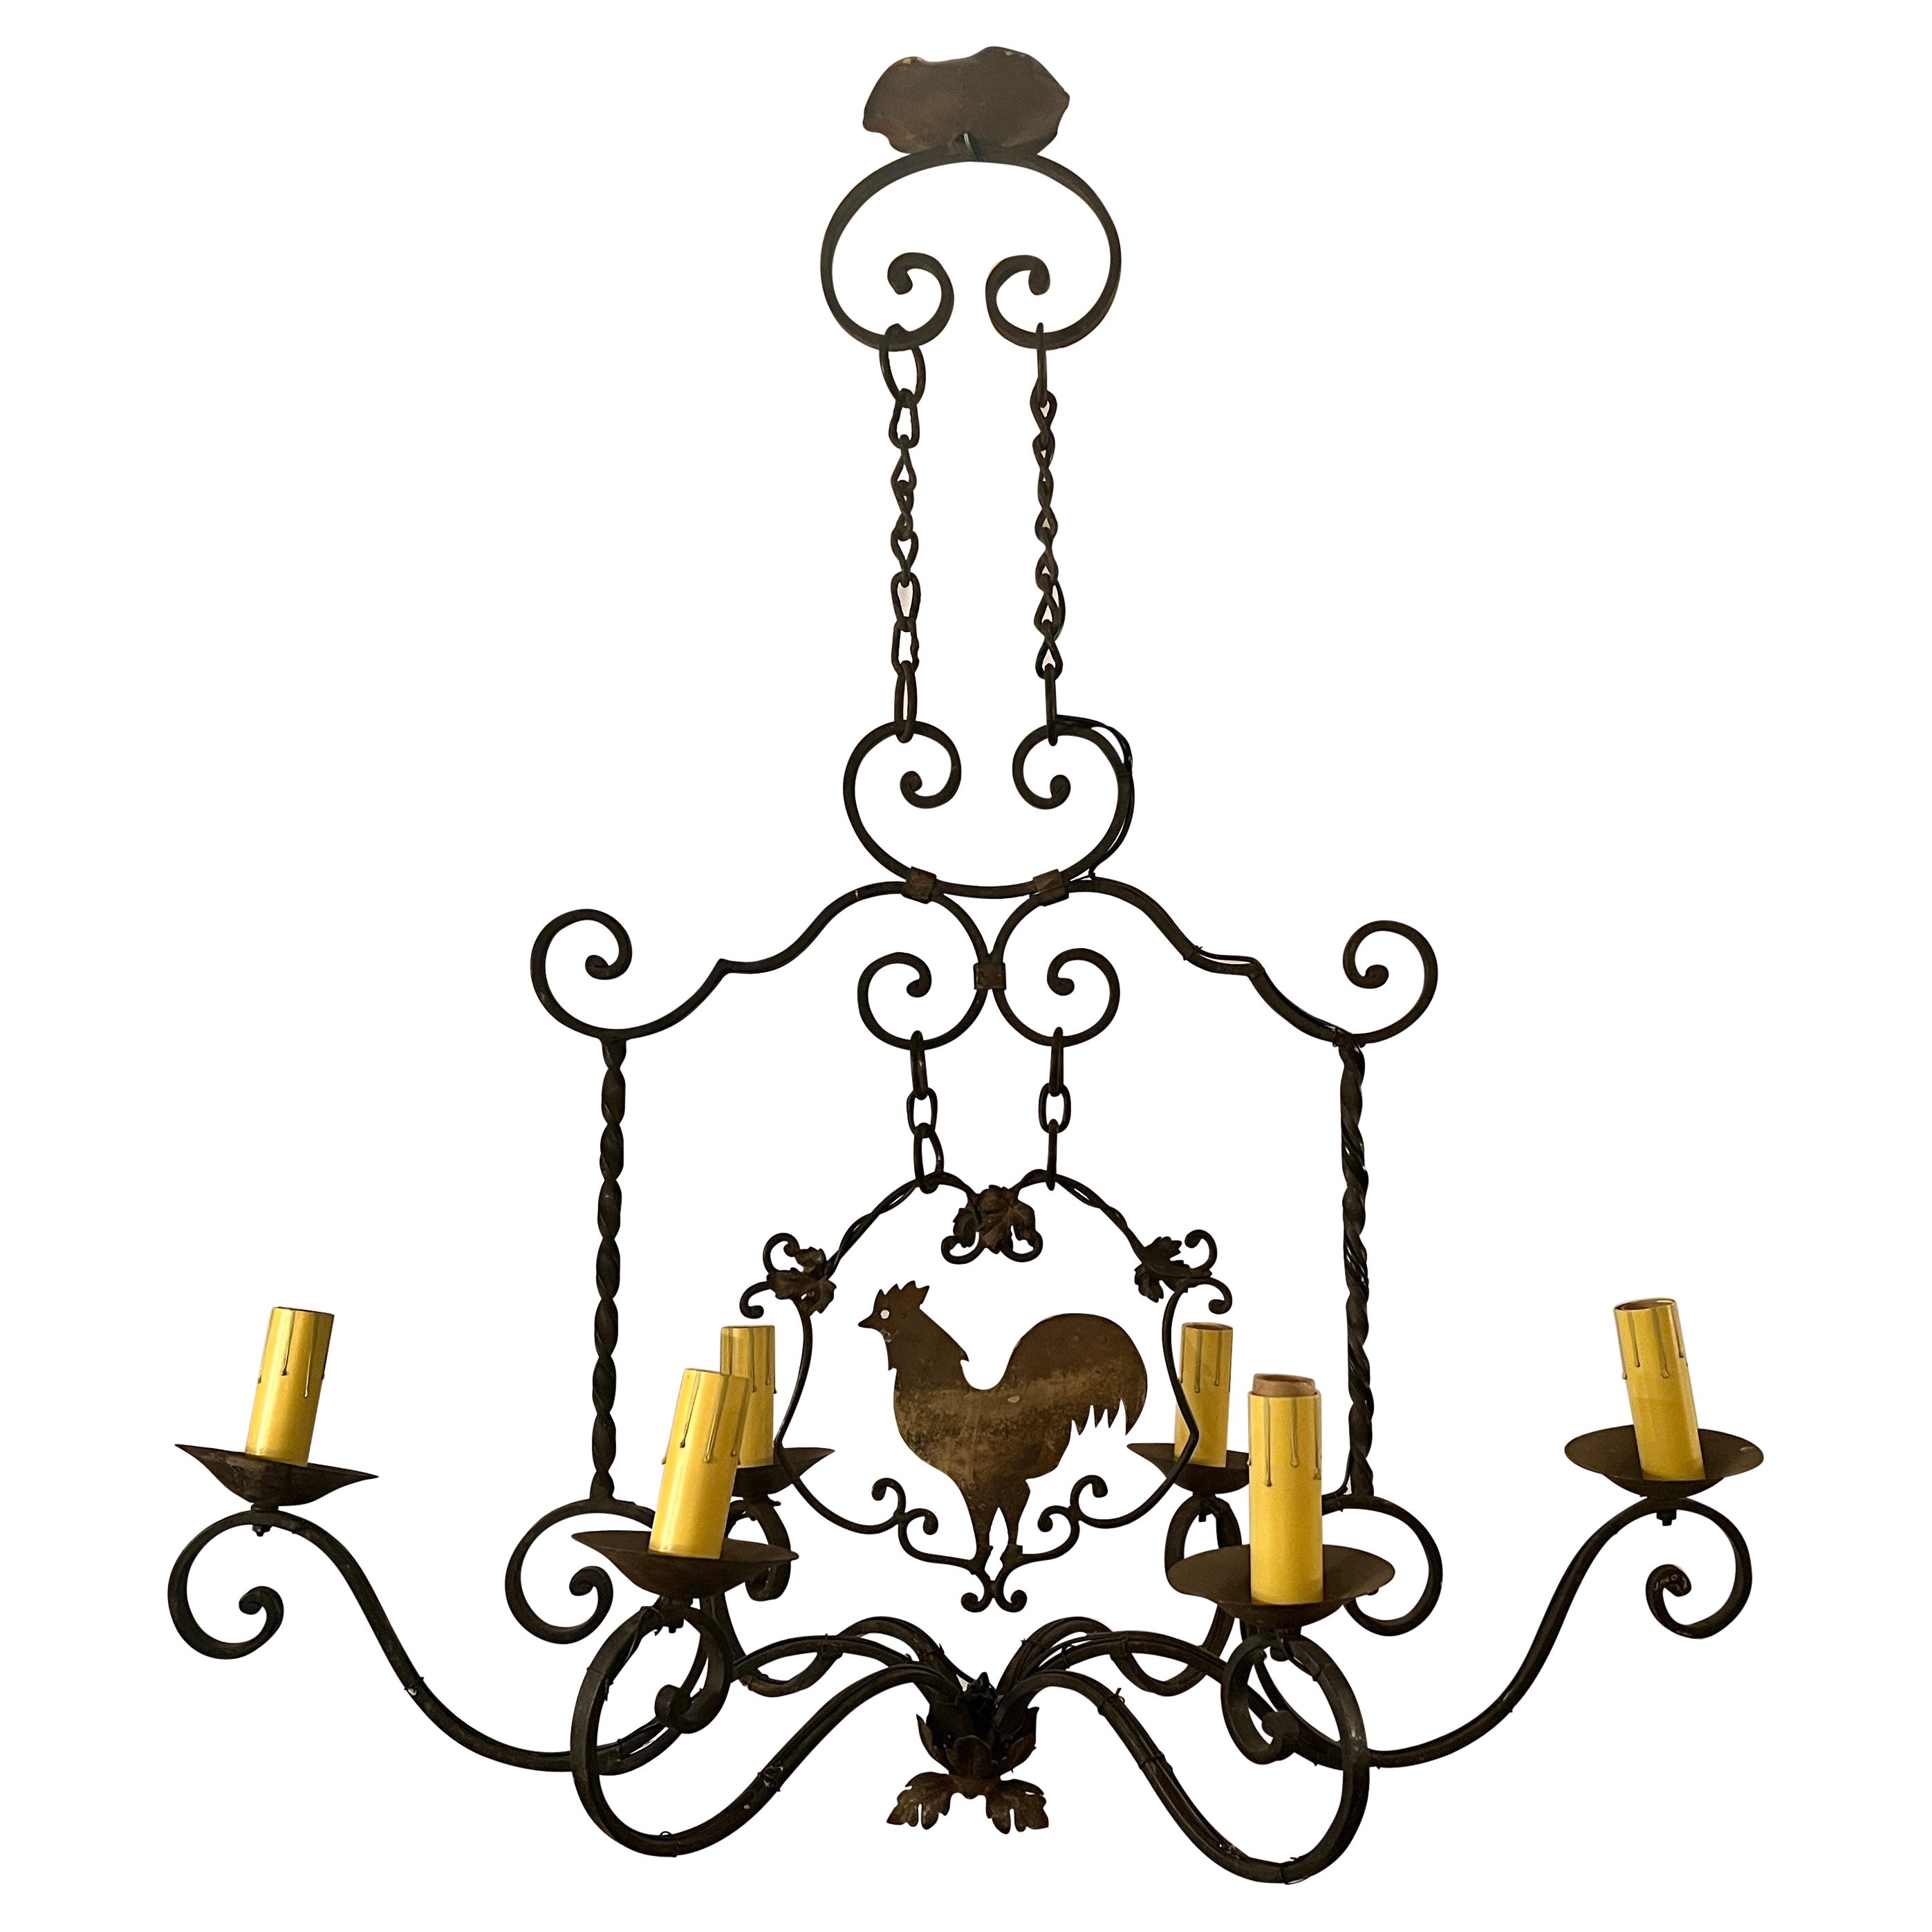 Antique French Wrought Iron "Rooster" Chandelier, Circa 1910-1920.